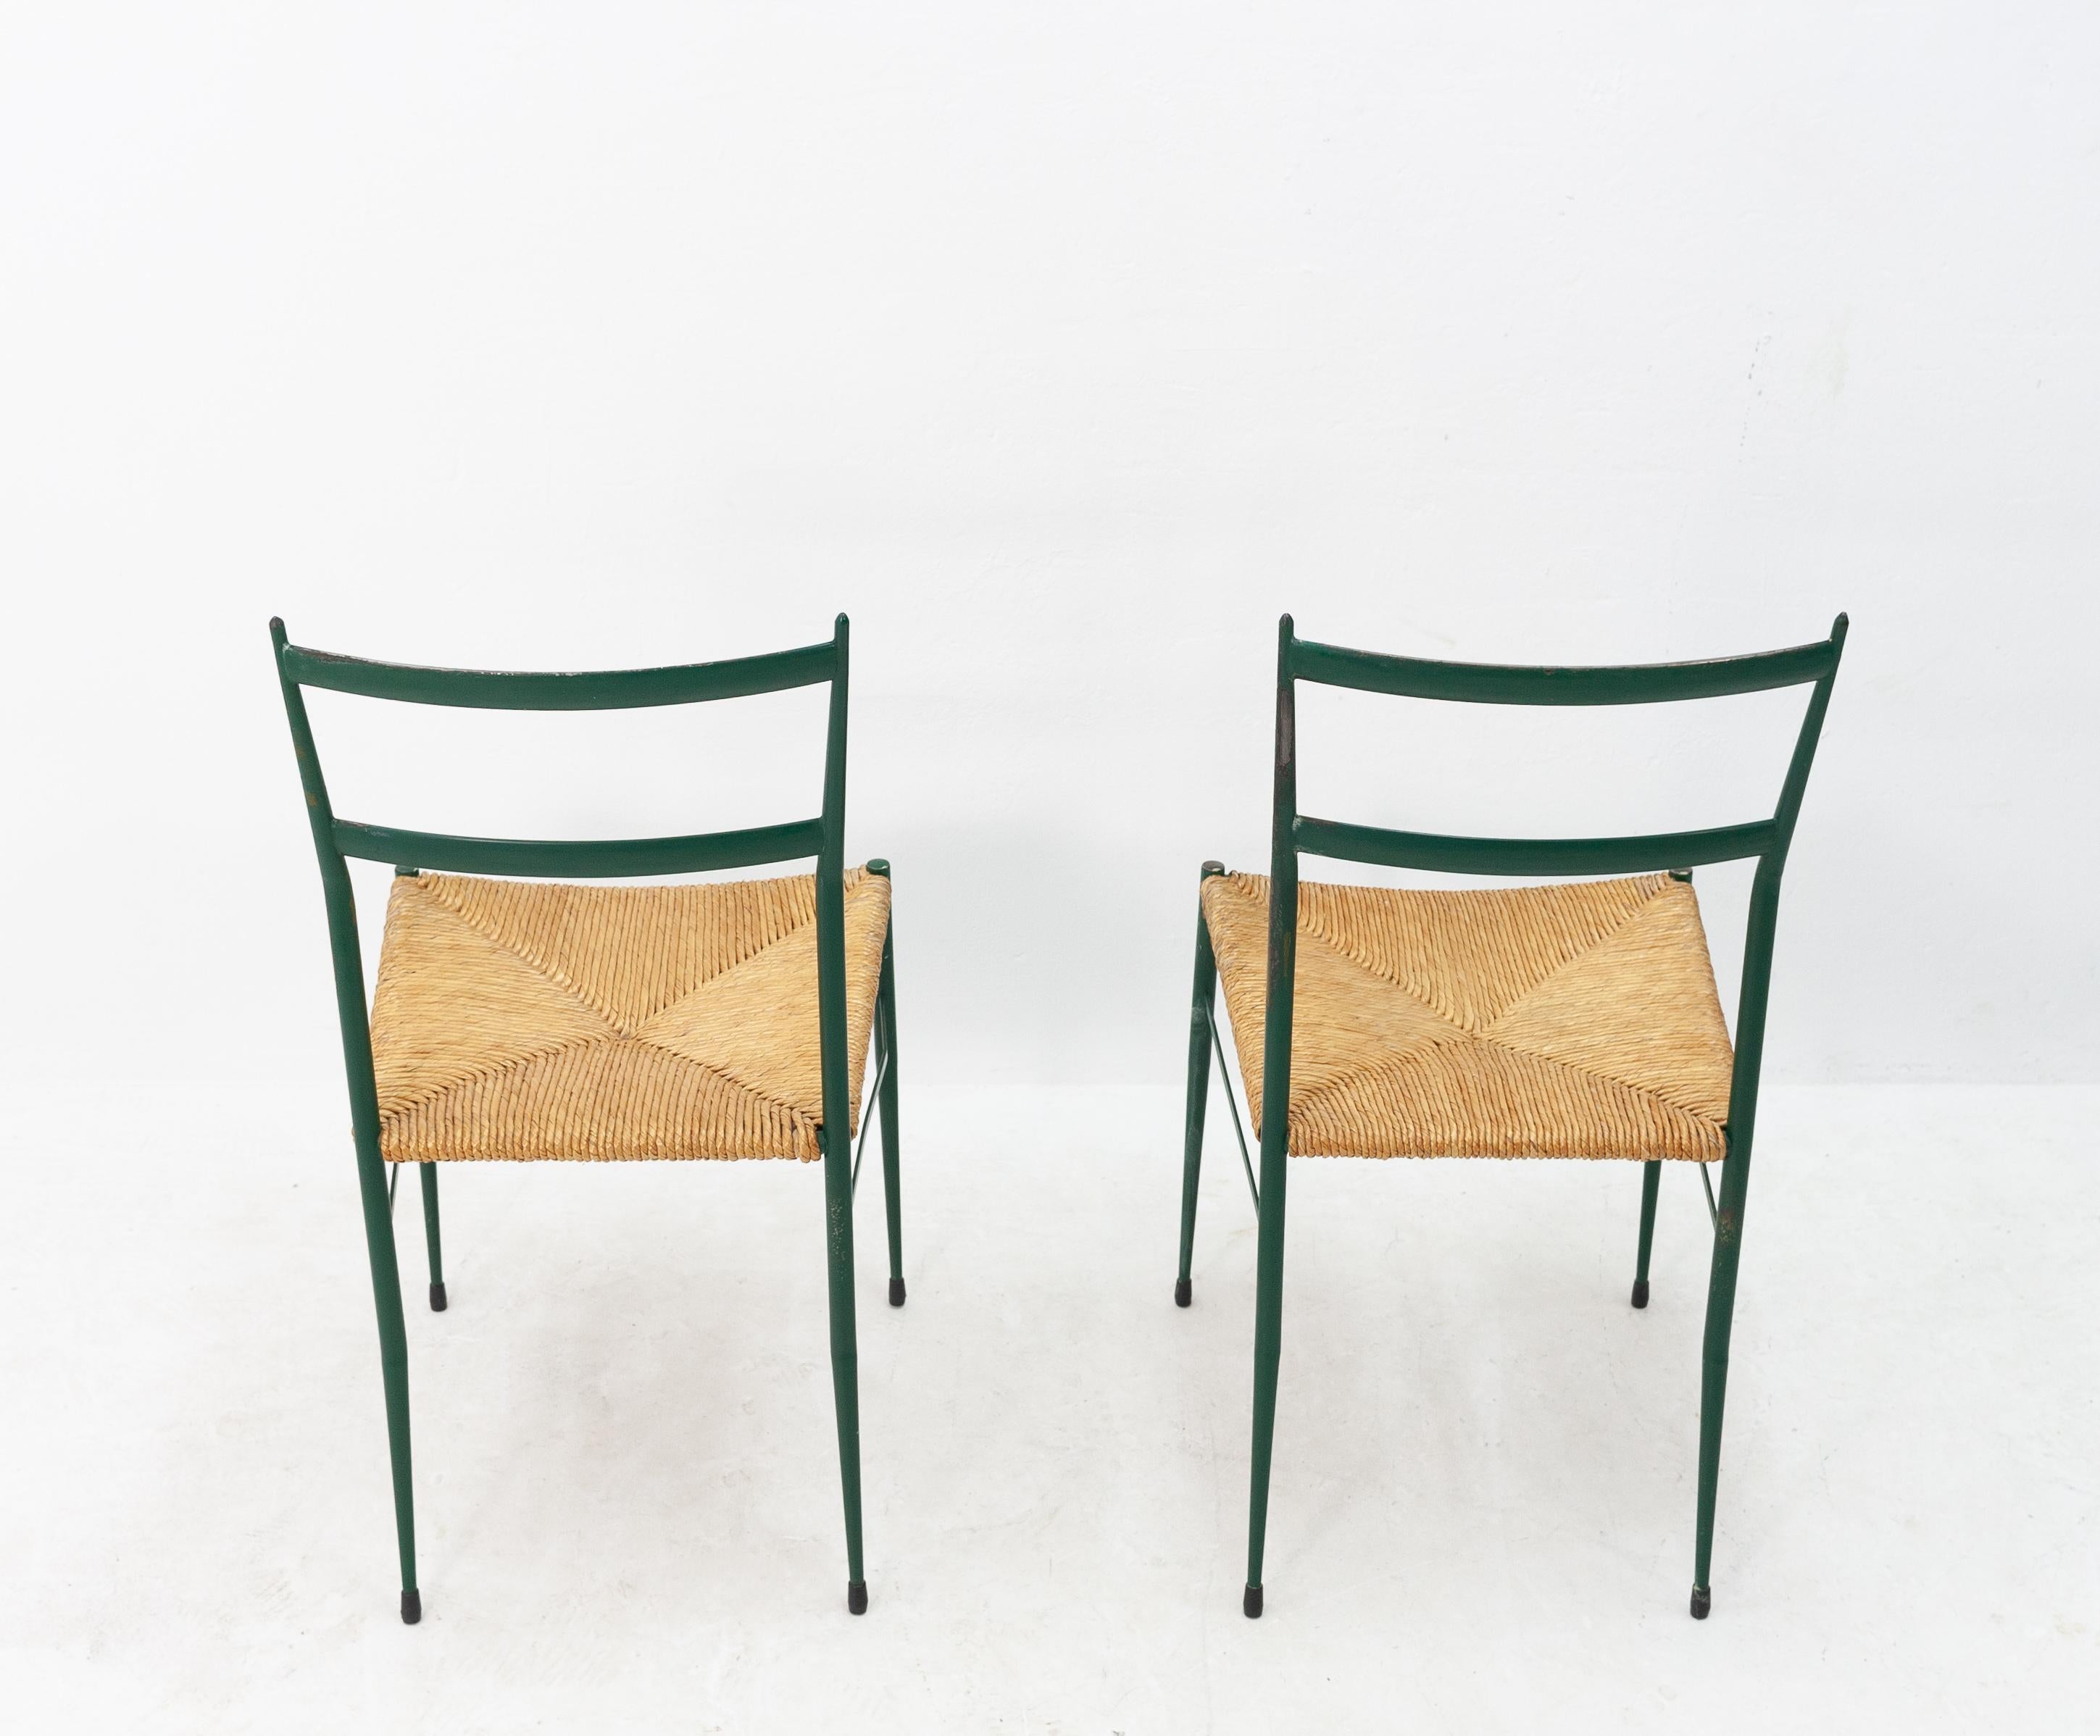 Two metal 'superleggera' chairs design Gio Ponti. These chairs where sold in the famous Dutch warehouse 